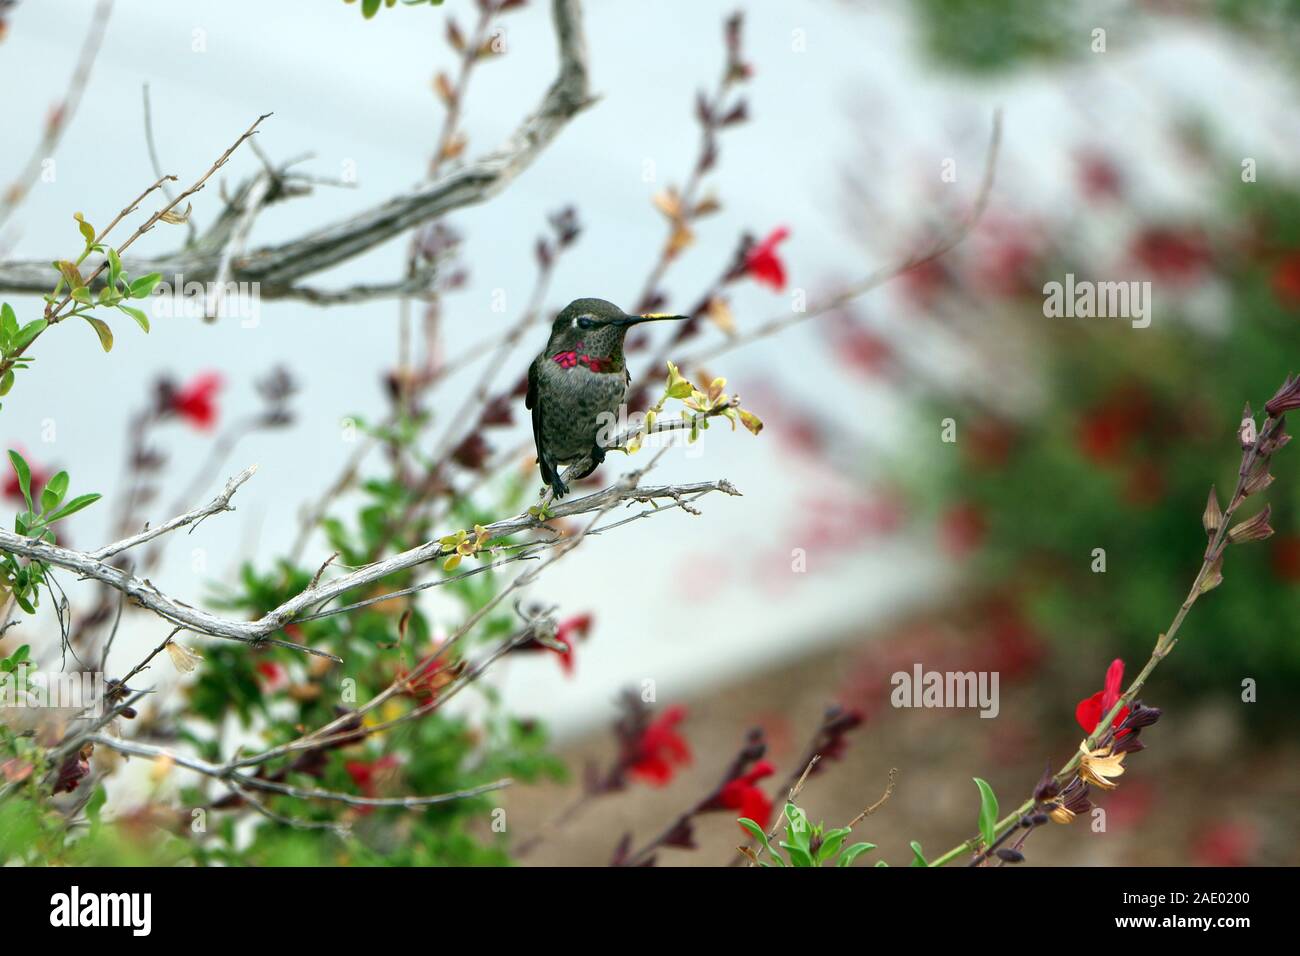 A ruby-throated hummingbird standing on the tree branch in front of  the famous resort Griffith Observatory, CA, US Stock Photo